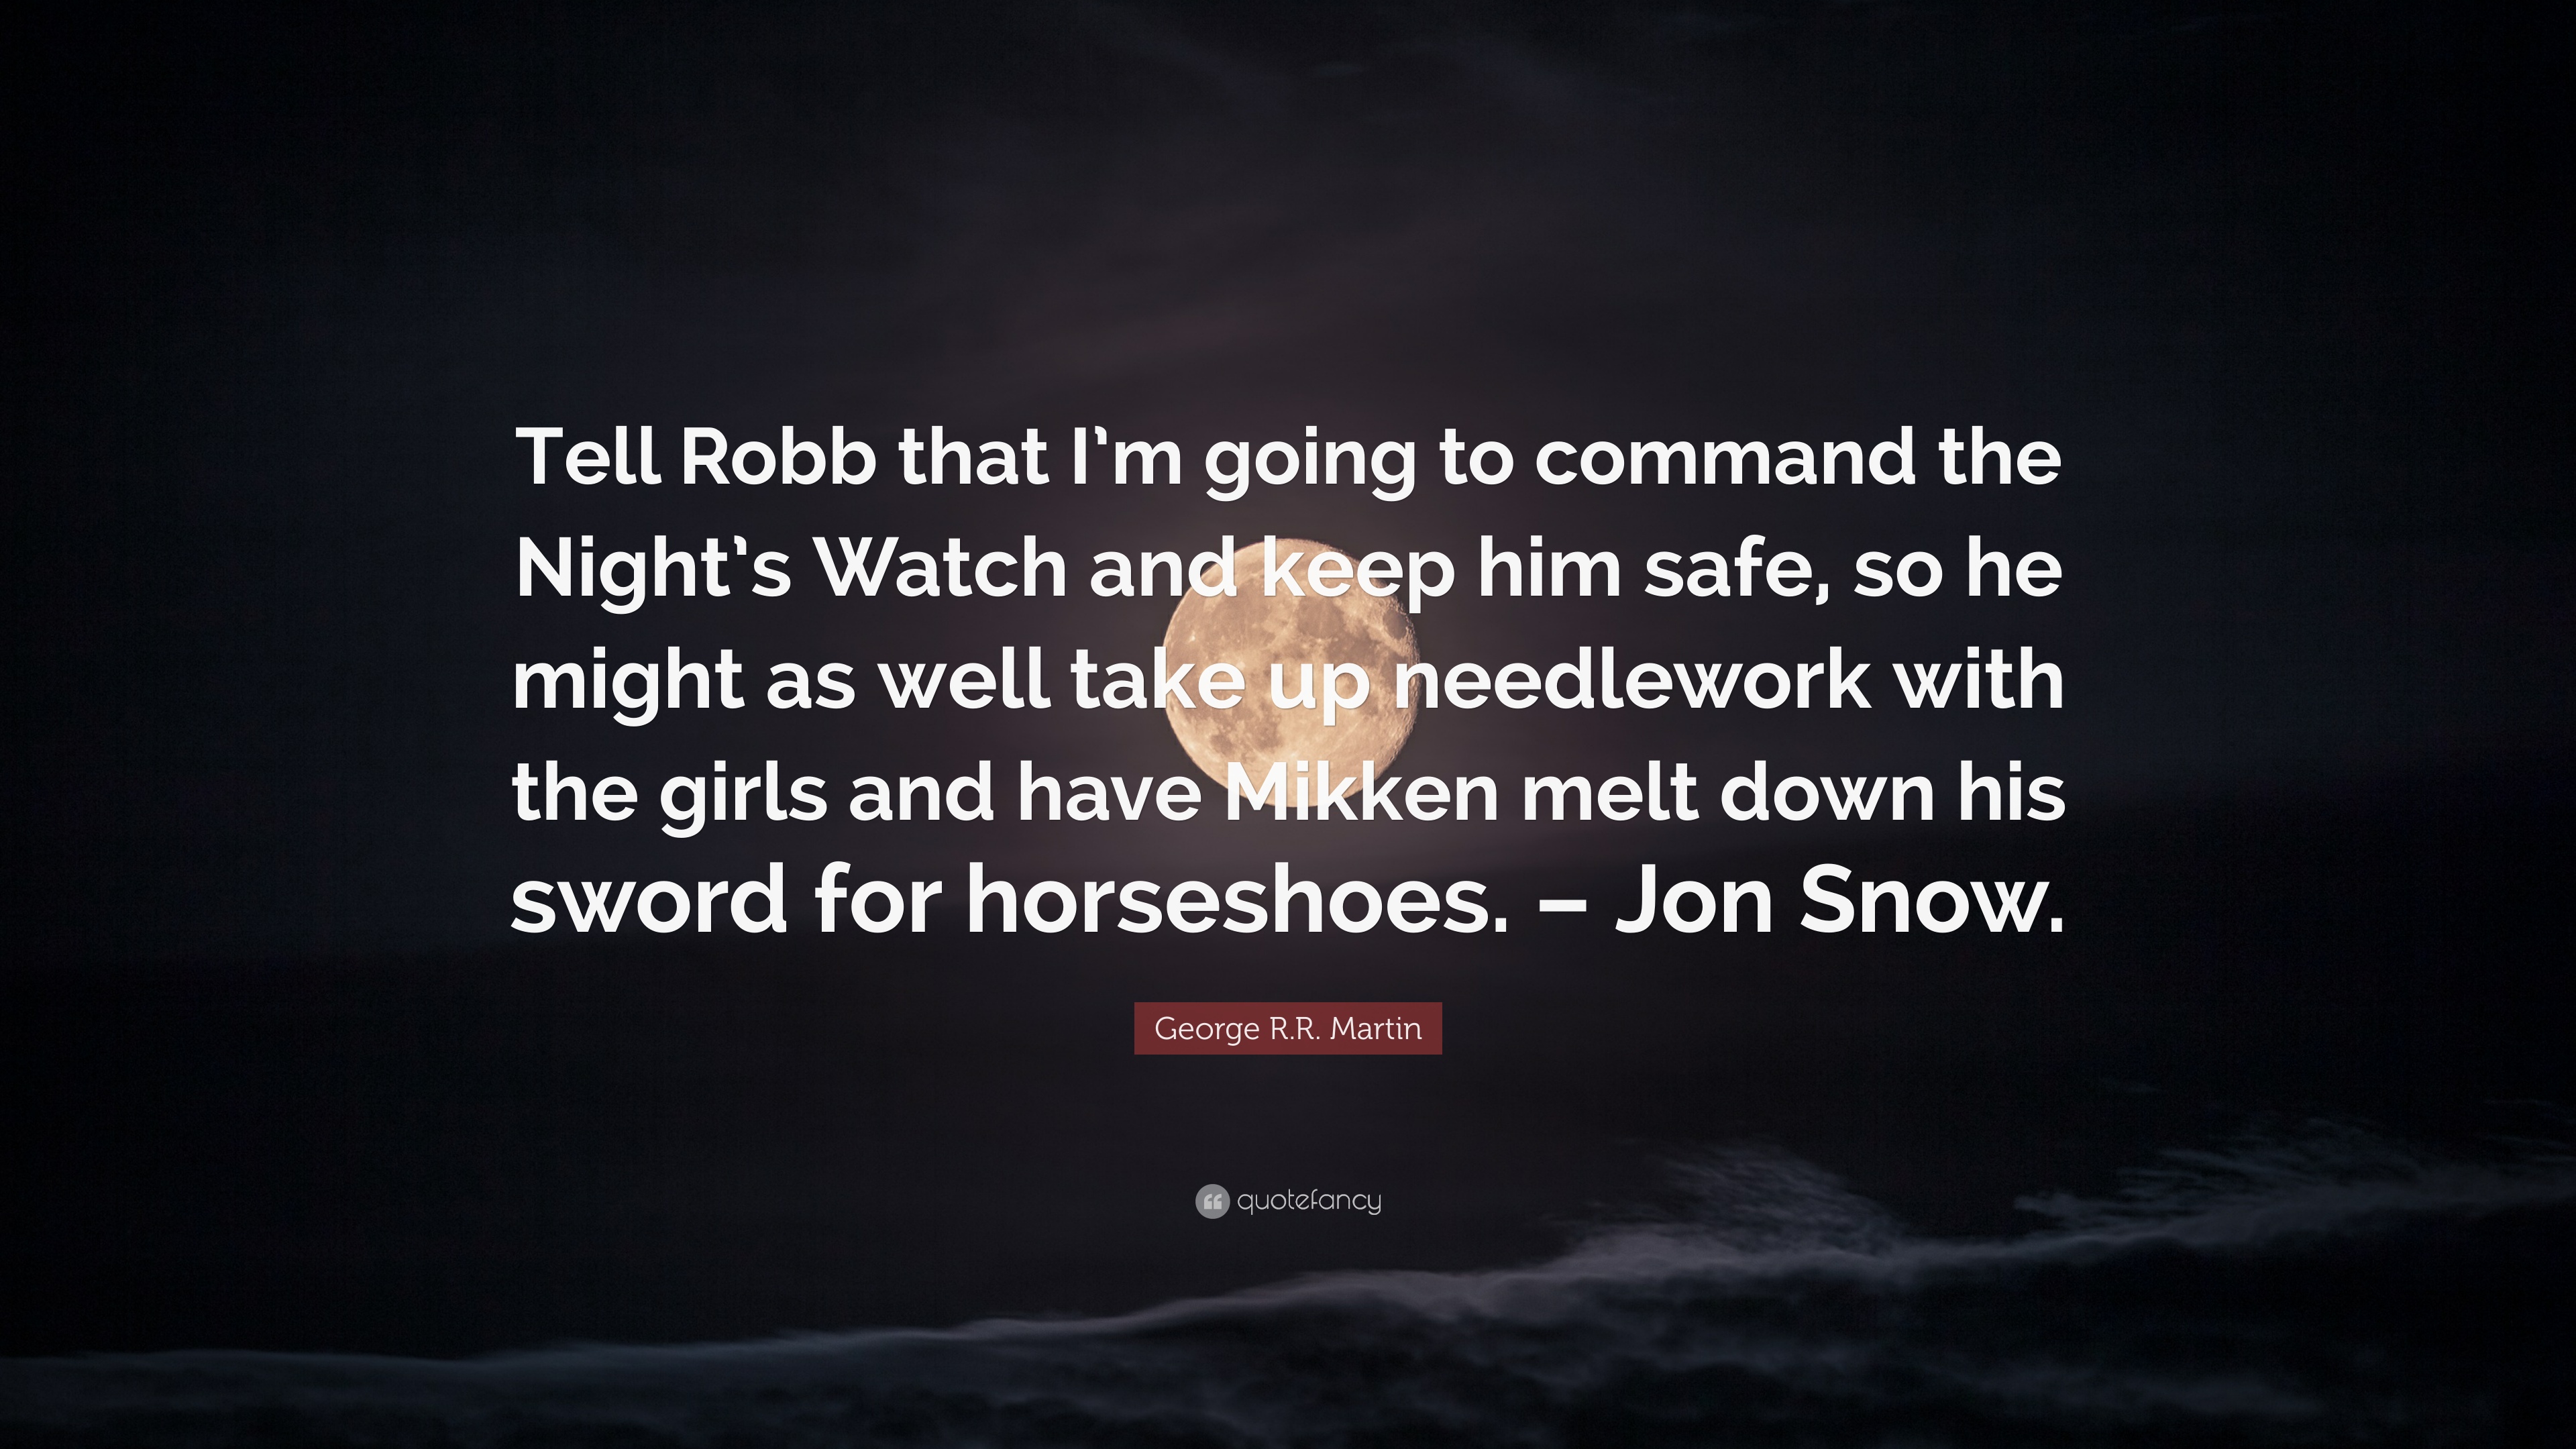 George R.R. Martin Quote: “Tell Robb that I'm going to command